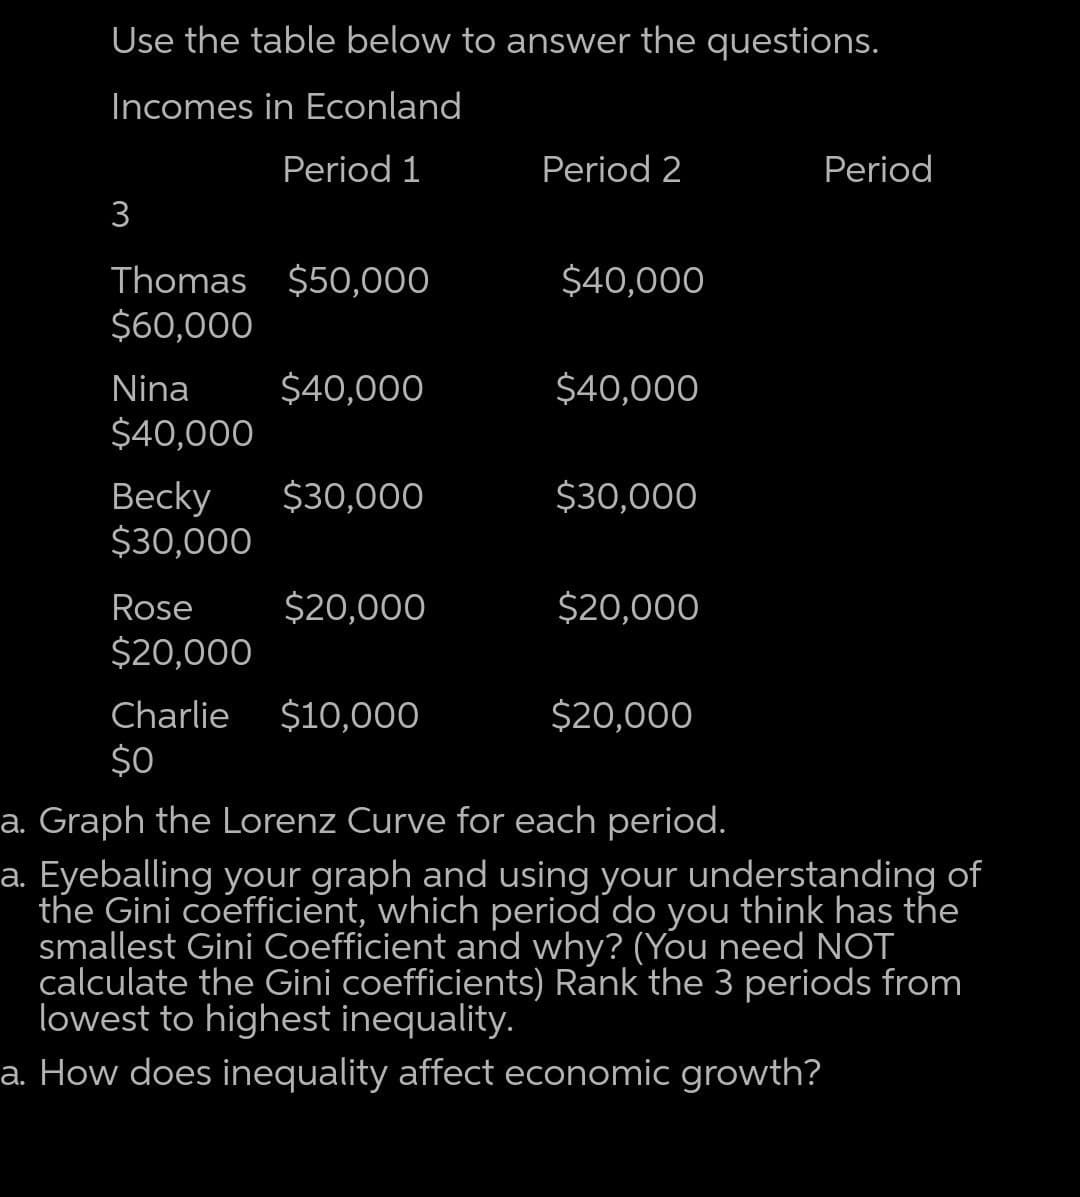 Use the table below to answer the questions.
Incomes in Econland
Period 1
Period 2
Period
3
Thomas $50,000
$60,000
$40,000
Nina
$40,000
$40,000
$40,000
$30,000
$30,000
Becky
$30,000
Rose
$20,000
$20,000
$20,000
Charlie
$10,000
$20,000
$0
a. Graph the Lorenz Curve for each period.
a. Eyeballing your graph and using your understanding of
the Gini coefficient, which period do you think has the
smallest Gini Coefficient and why? (You need NOT
calculate the Gini coefficients) Rank the 3 periods from
lowest to highest inequality.
a. How does inequality affect economic growth?
